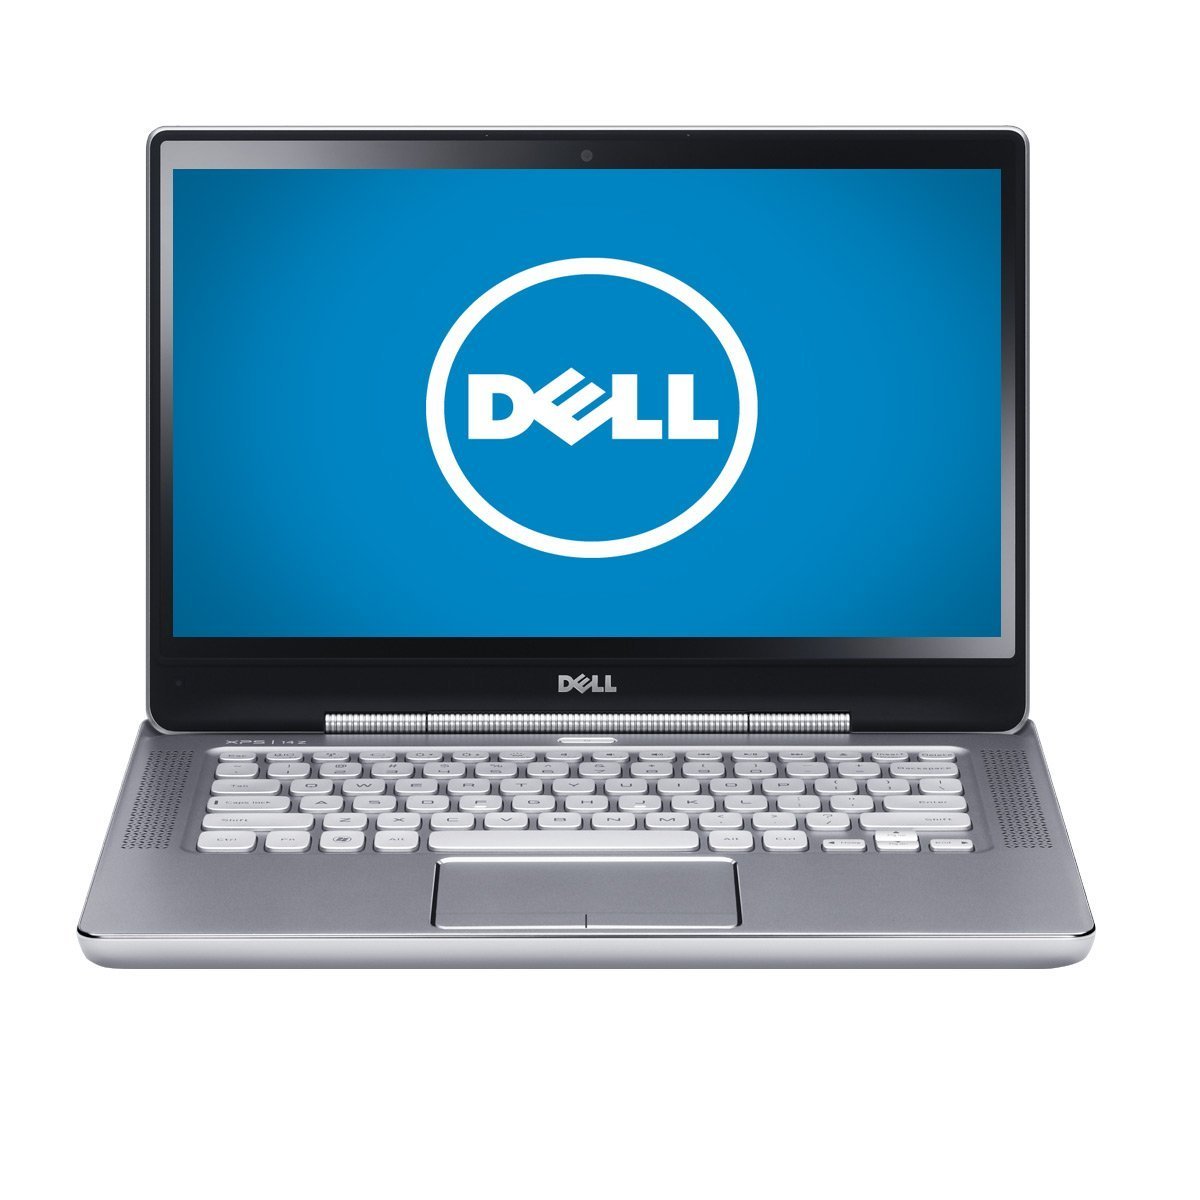 http://thetechjournal.com/wp-content/uploads/images/1203/1331359094-dell-xps-x14z3846slv-14inch-laptop--1.jpg